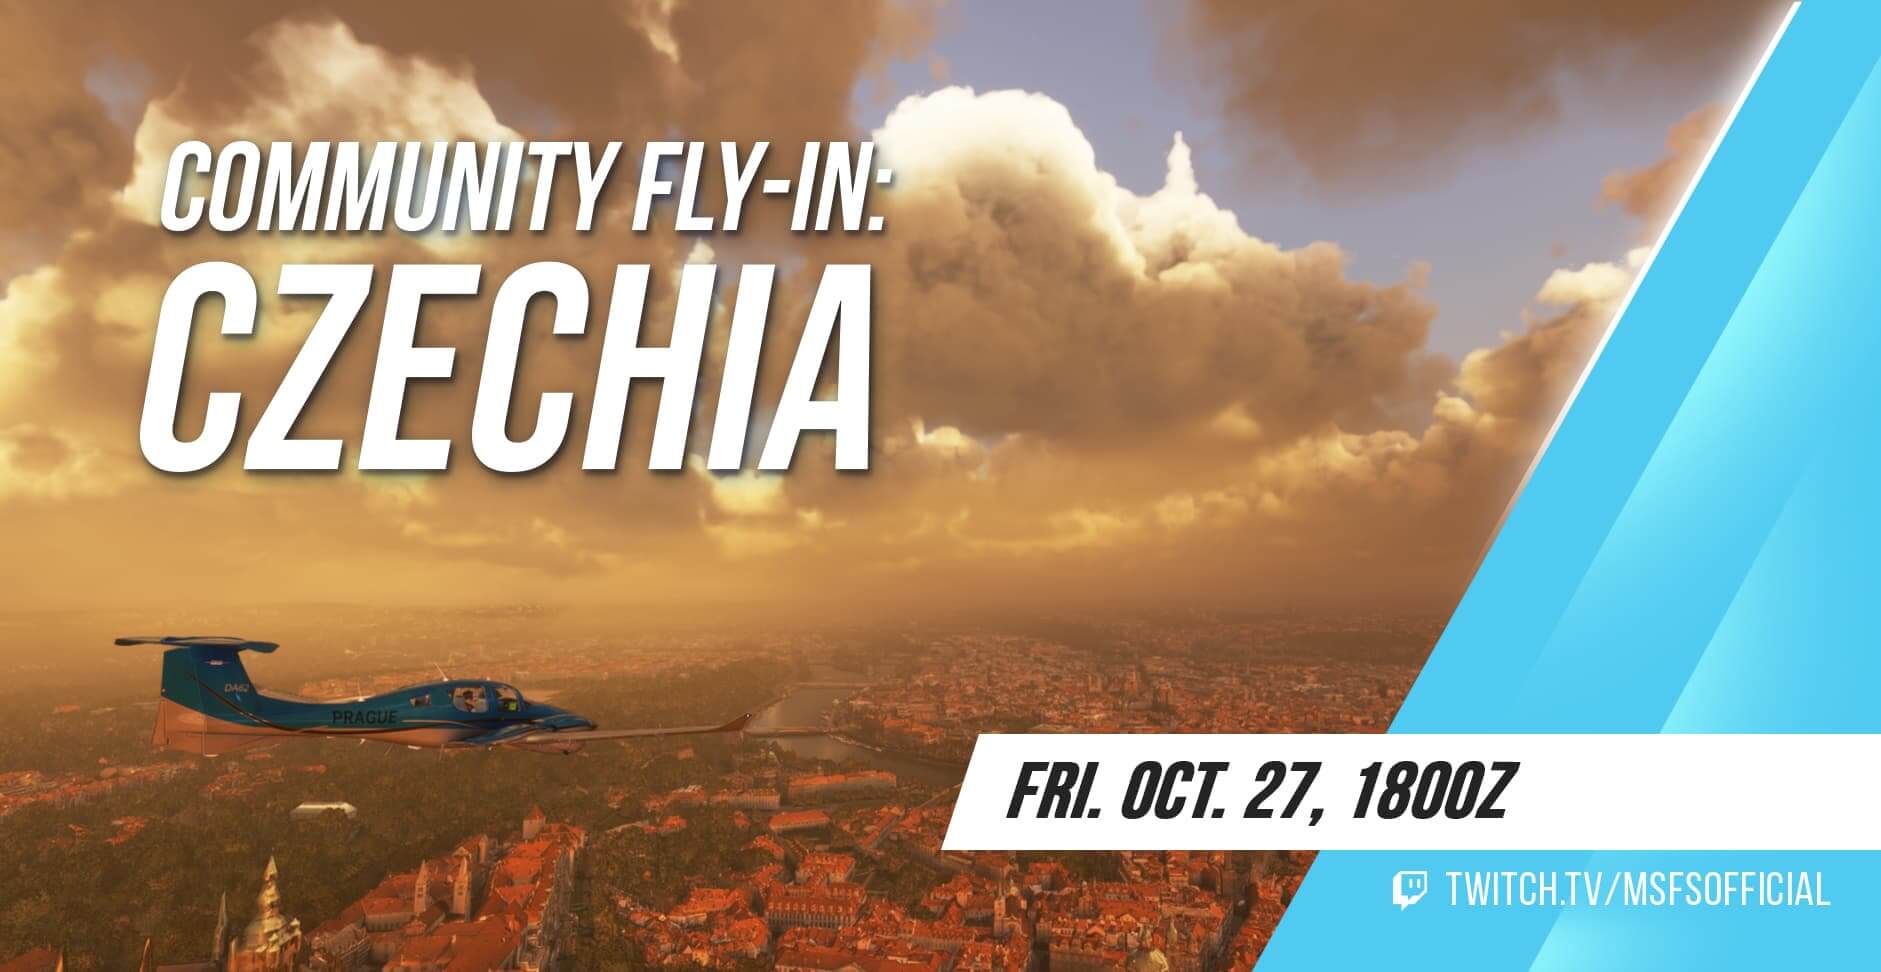 Community Fly-In: Czechia. Friday October 27th at 18:00z. www.twitch.tv/msfsofficial